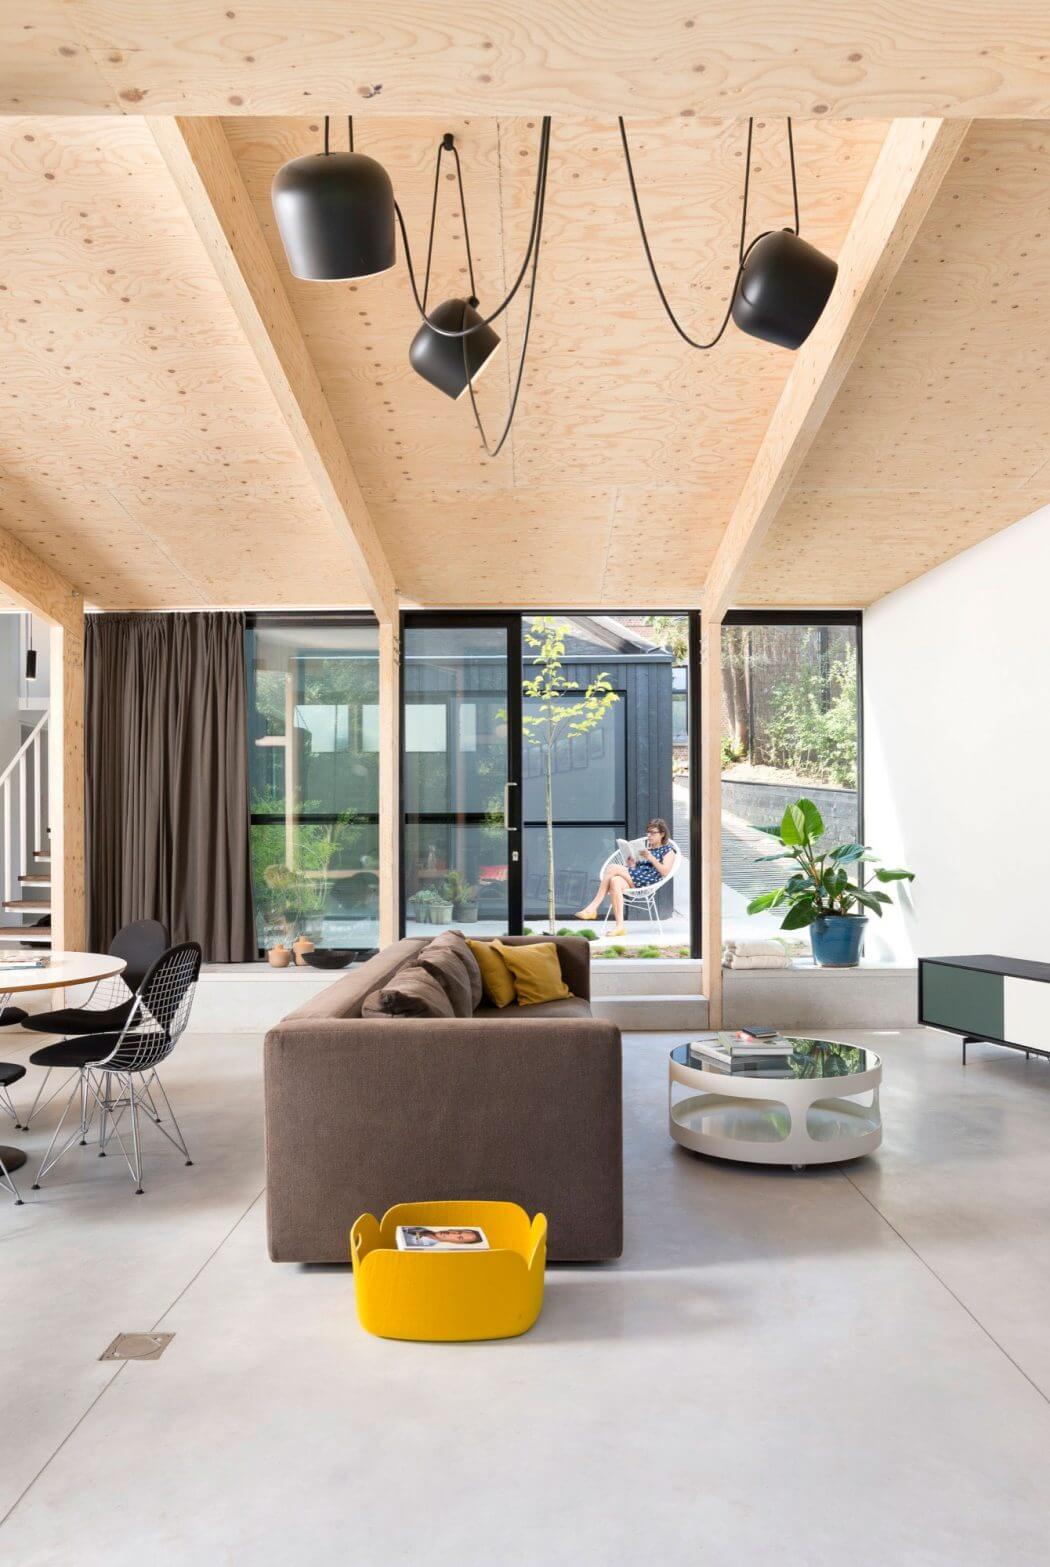 Modern open-concept living space with wooden ceilings, pendant lighting, and minimalist furnishings.